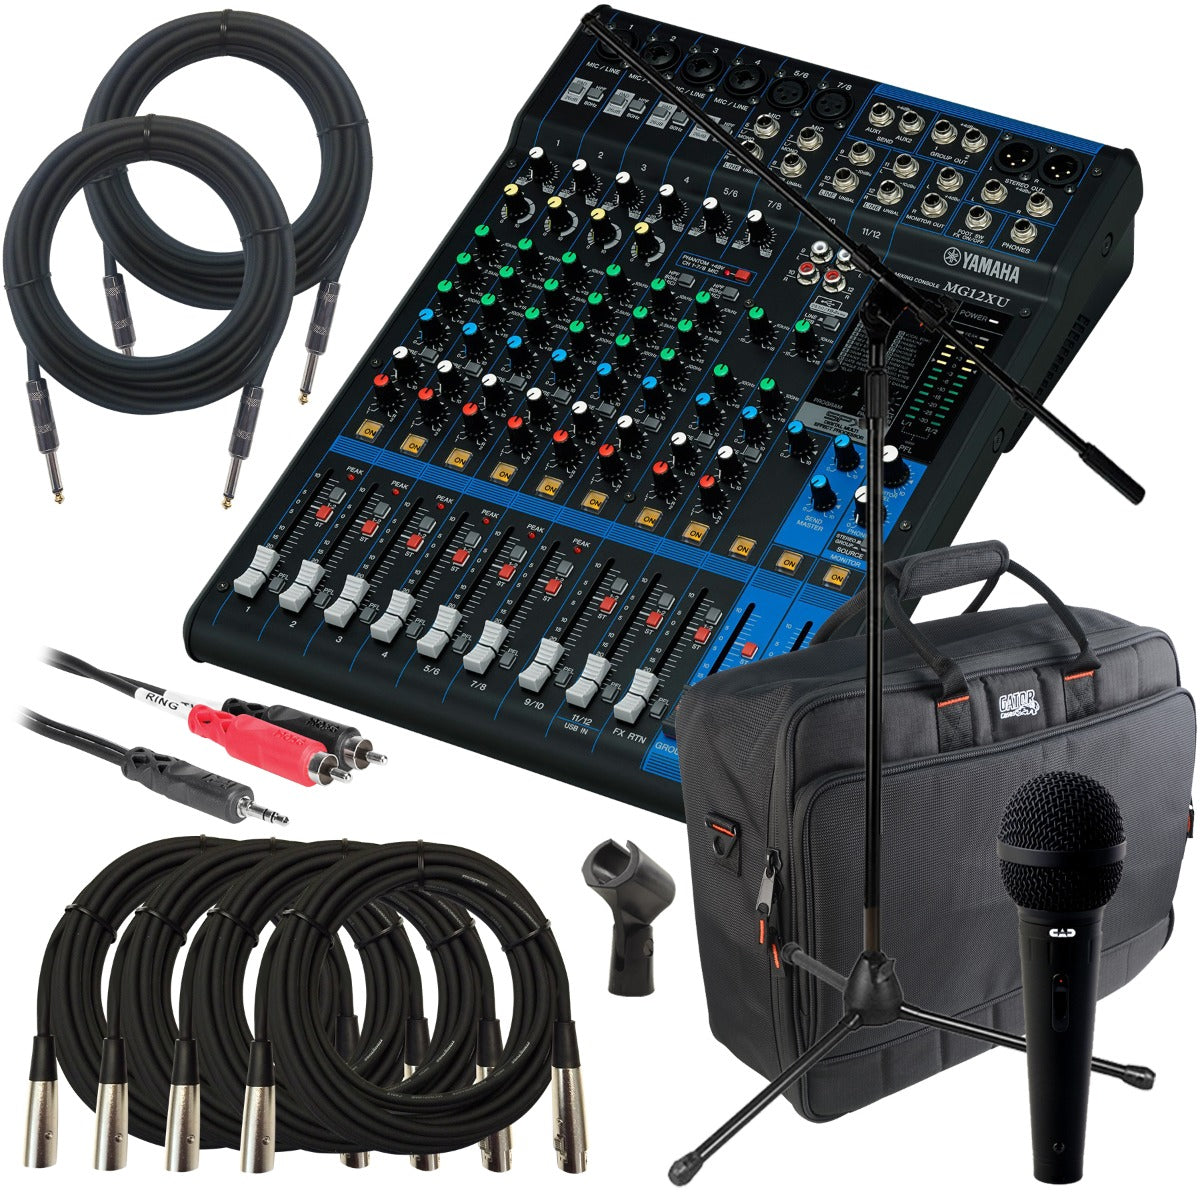 Collage of the components in the Yamaha MG12XU 12-Channel Compact Stereo Mixer/USB Interface PERFORMER PAK bundle